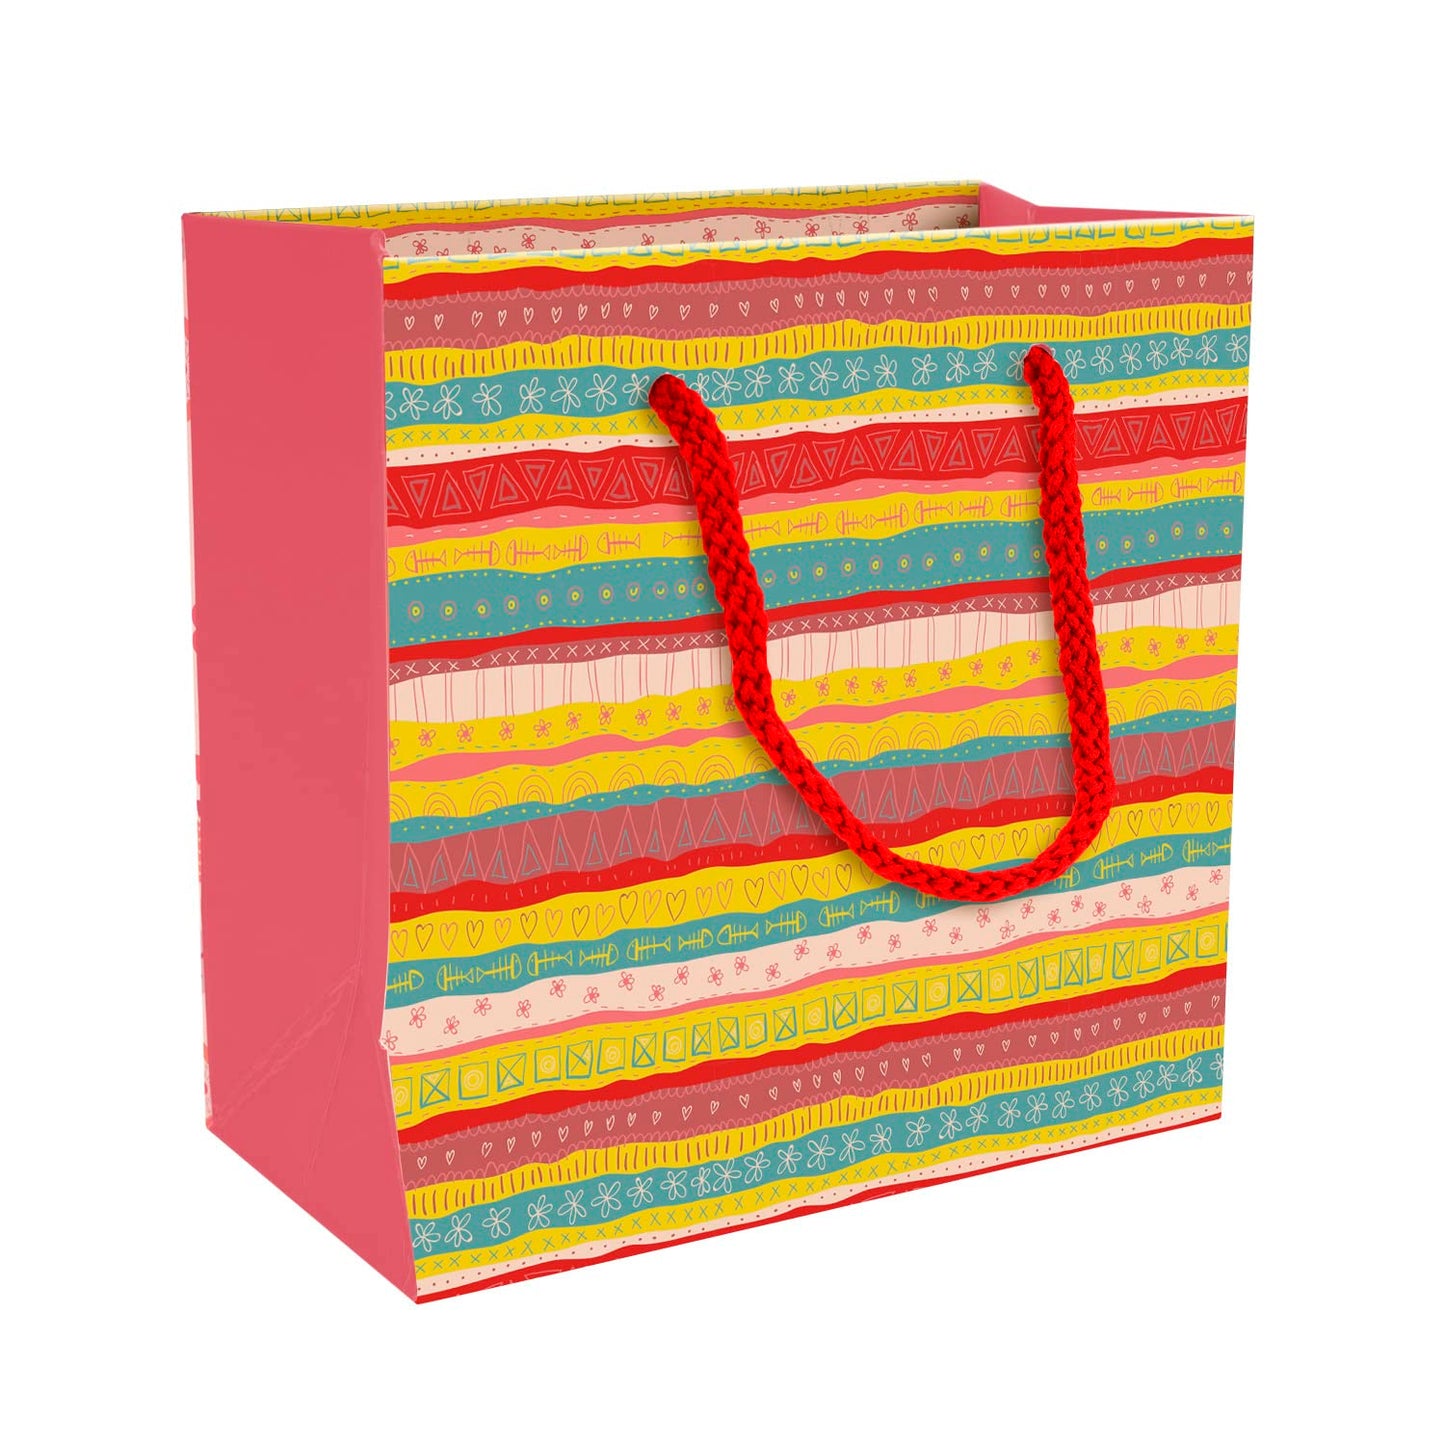 PaperPep Multicolor Festive Print 6"X6"X3" Gift Paper Bag Pack of 6 | Gift Bags for Return Gifts, Presents, Weddings, Birthday, Holiday Presents, Celebrations